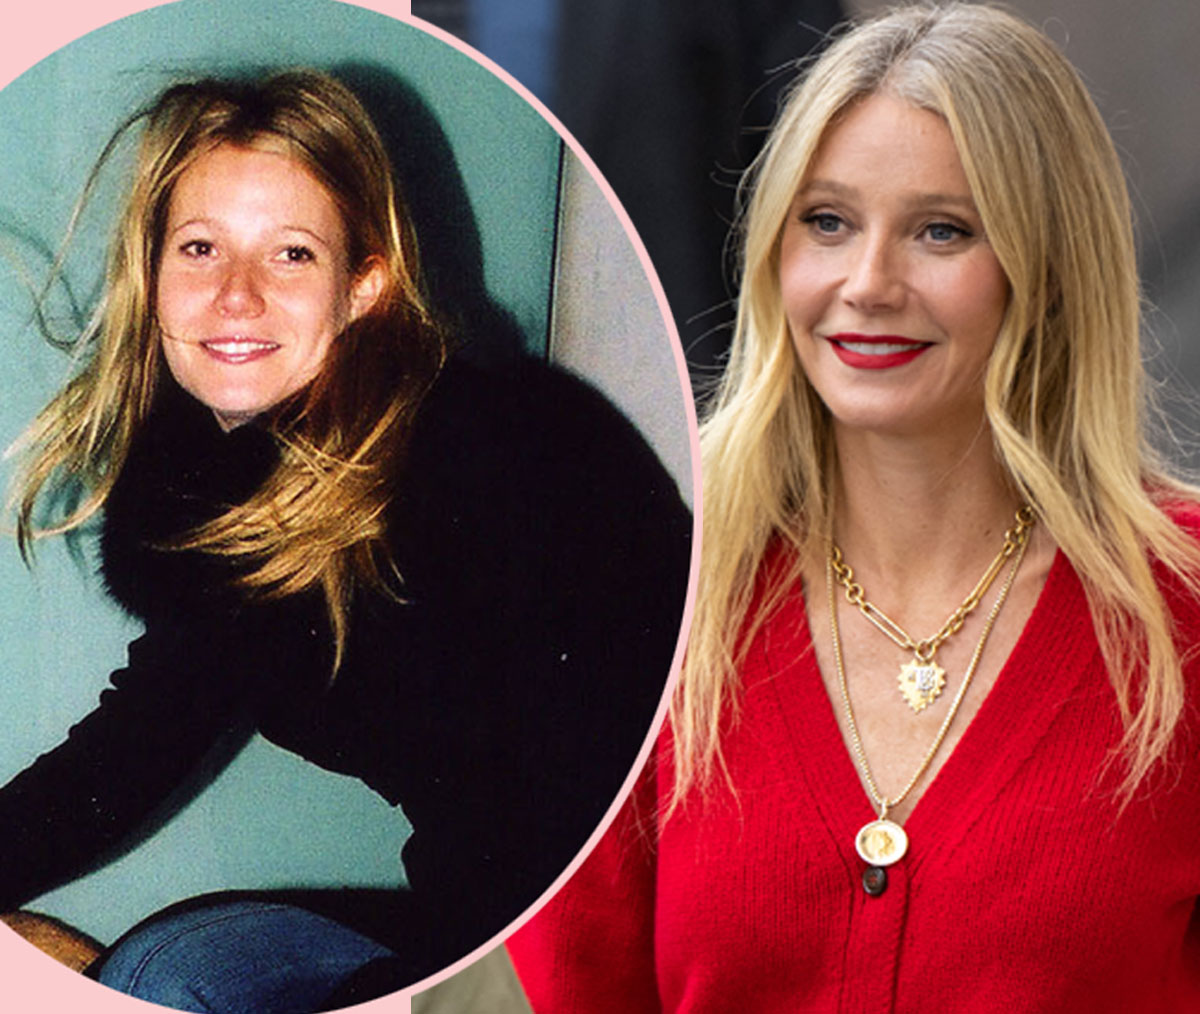 #Gwyneth Paltrow Brags About ‘Doing Cocaine & Not Getting Caught’ In The ‘90s